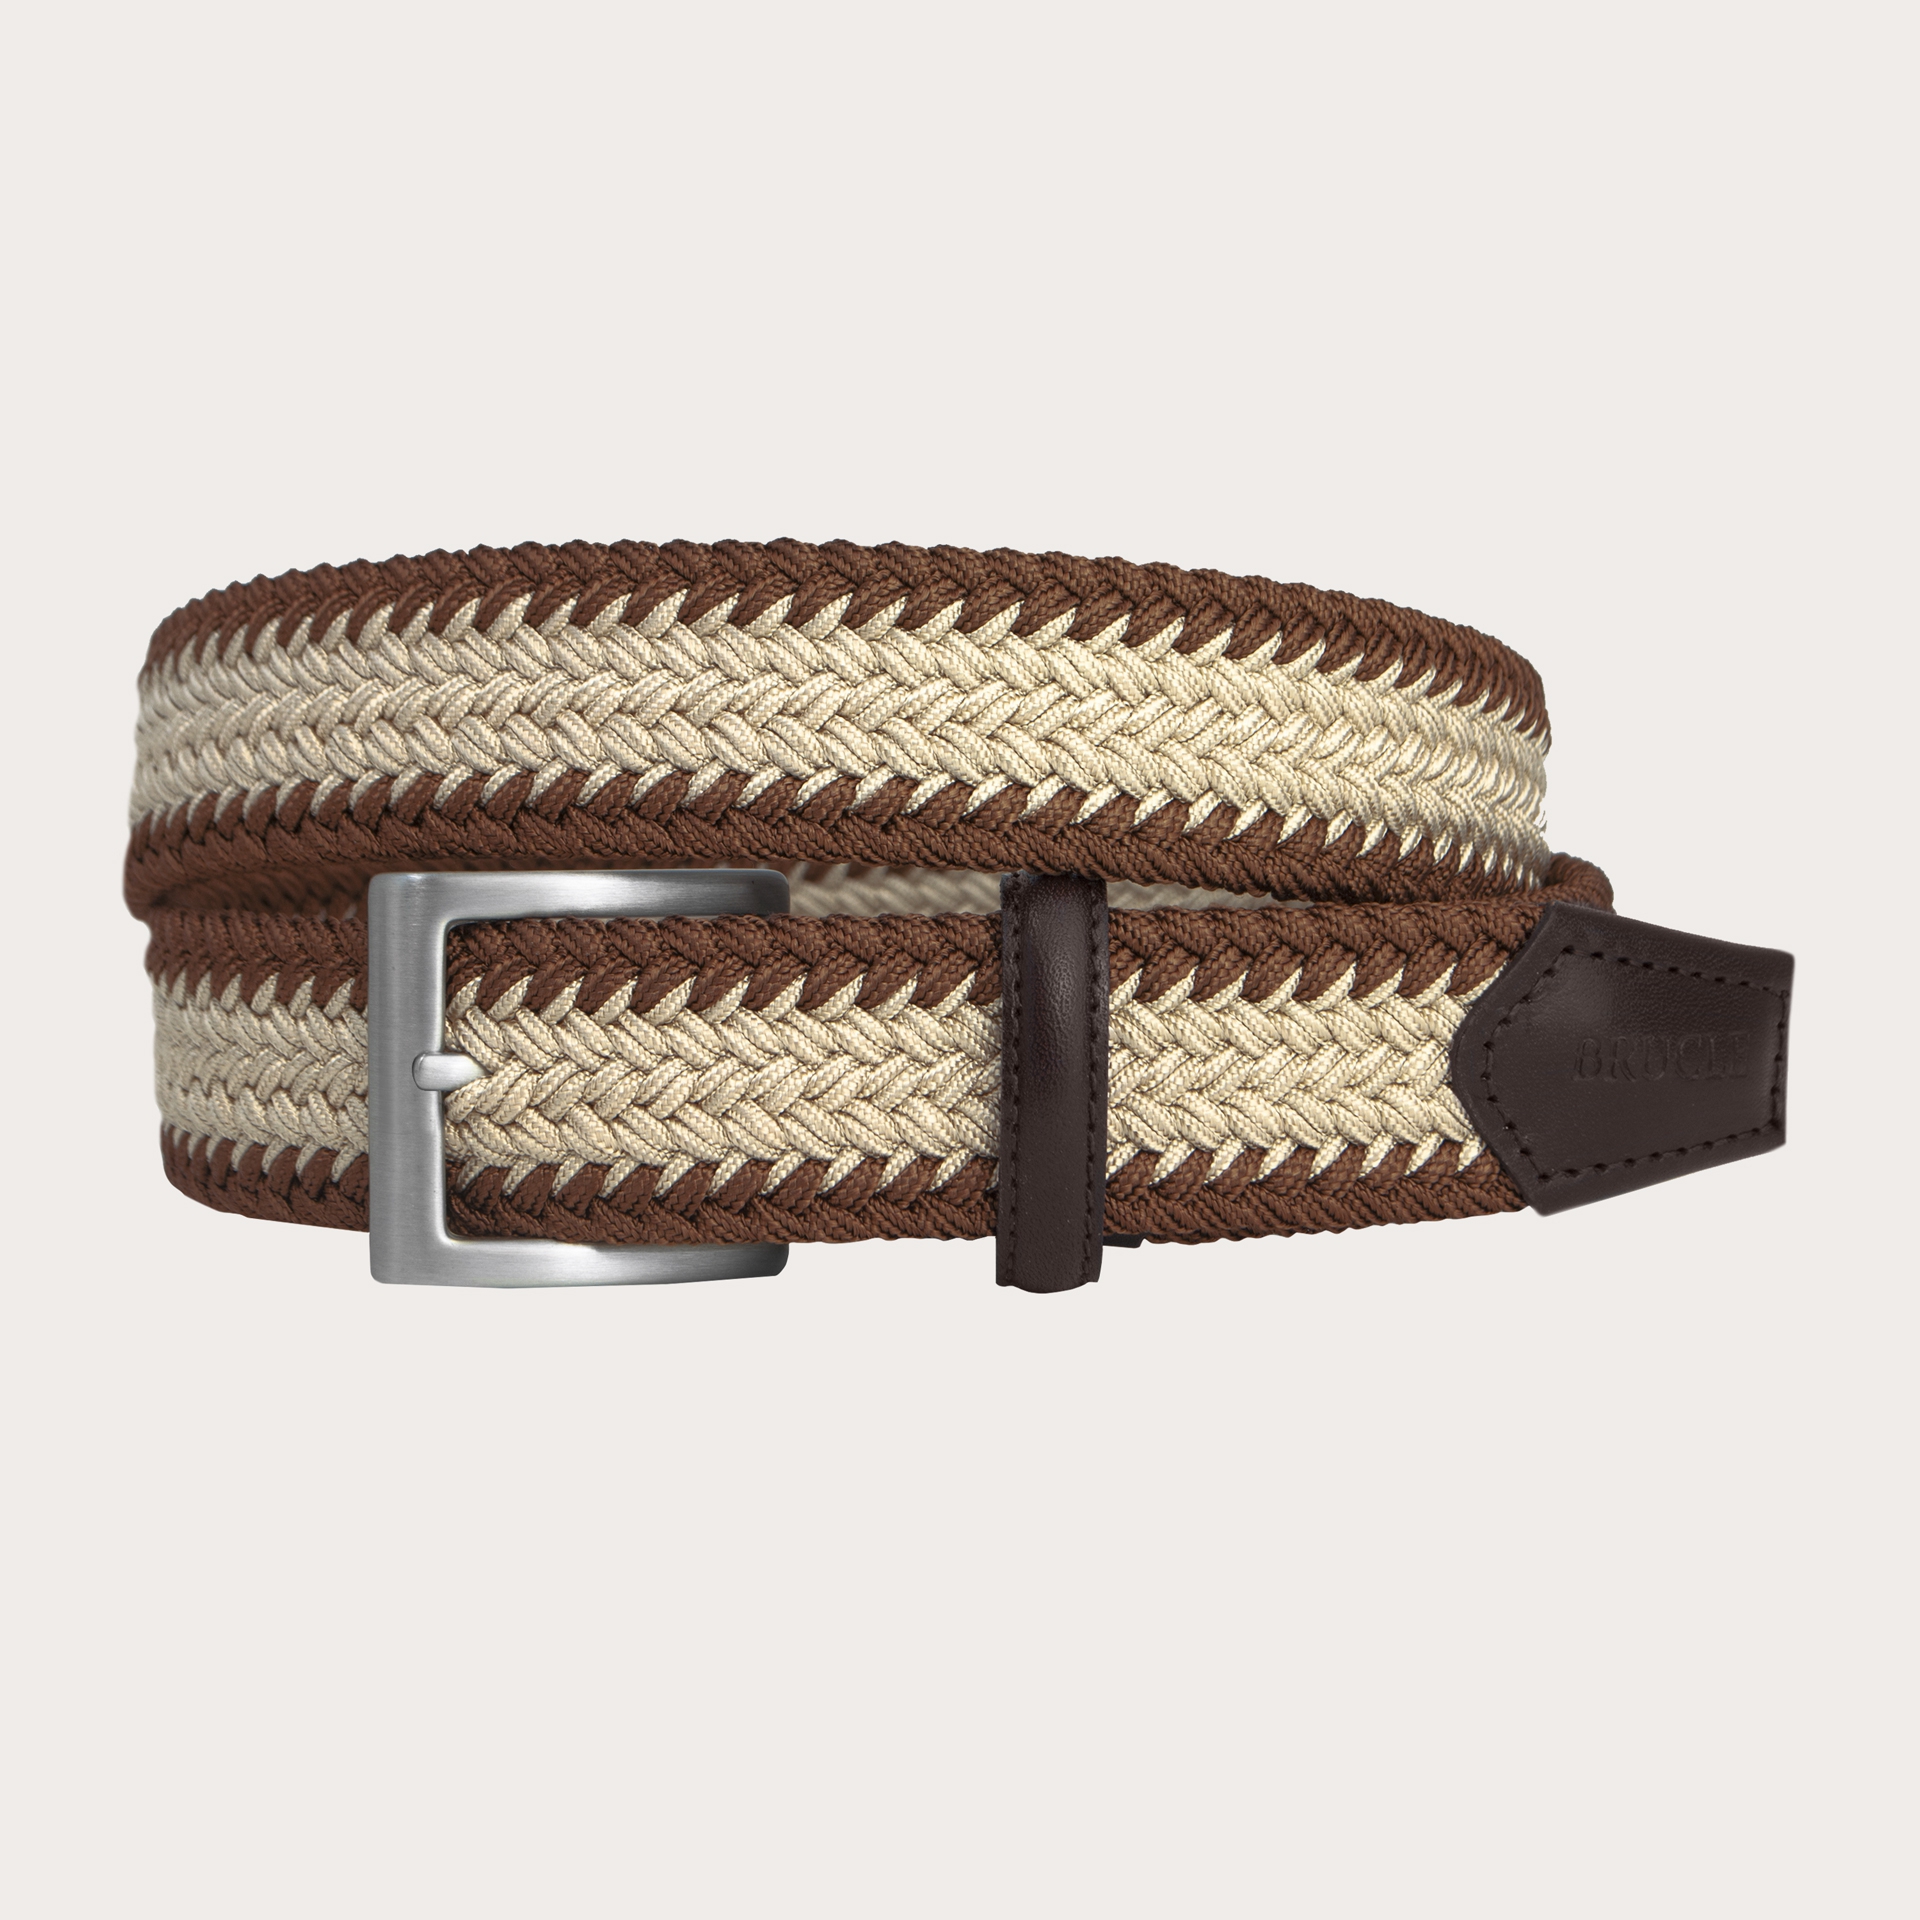 Striped Woven Belt with Crocodile Tabs and Brushed Nickel O-Rings